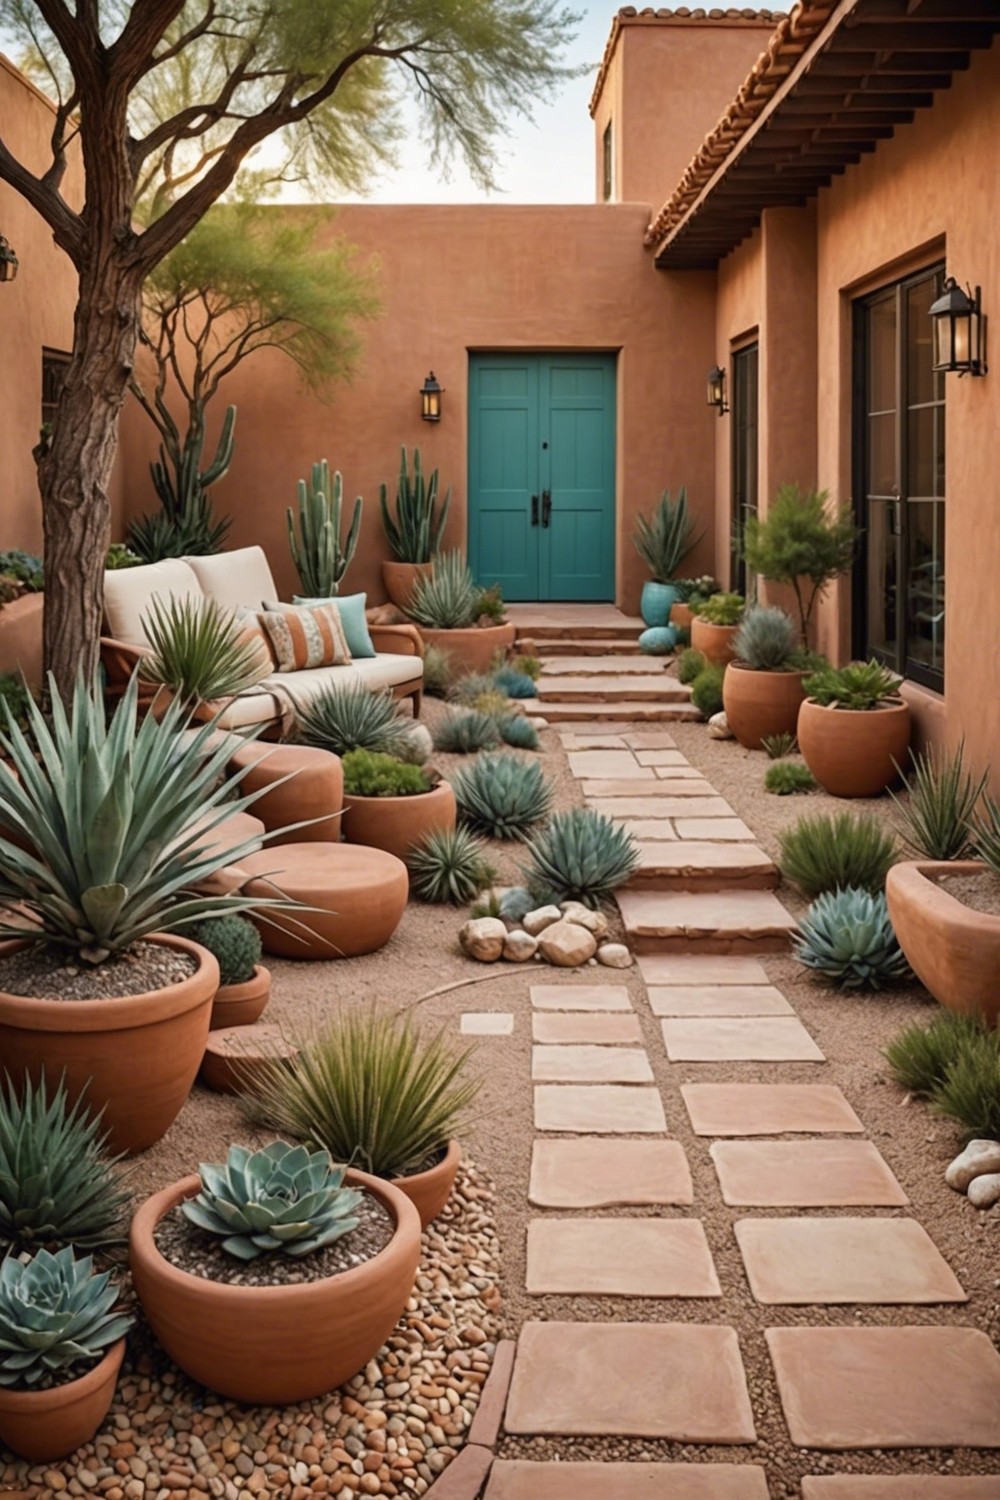 Soothing Desert Colors for a Calming Ambiance